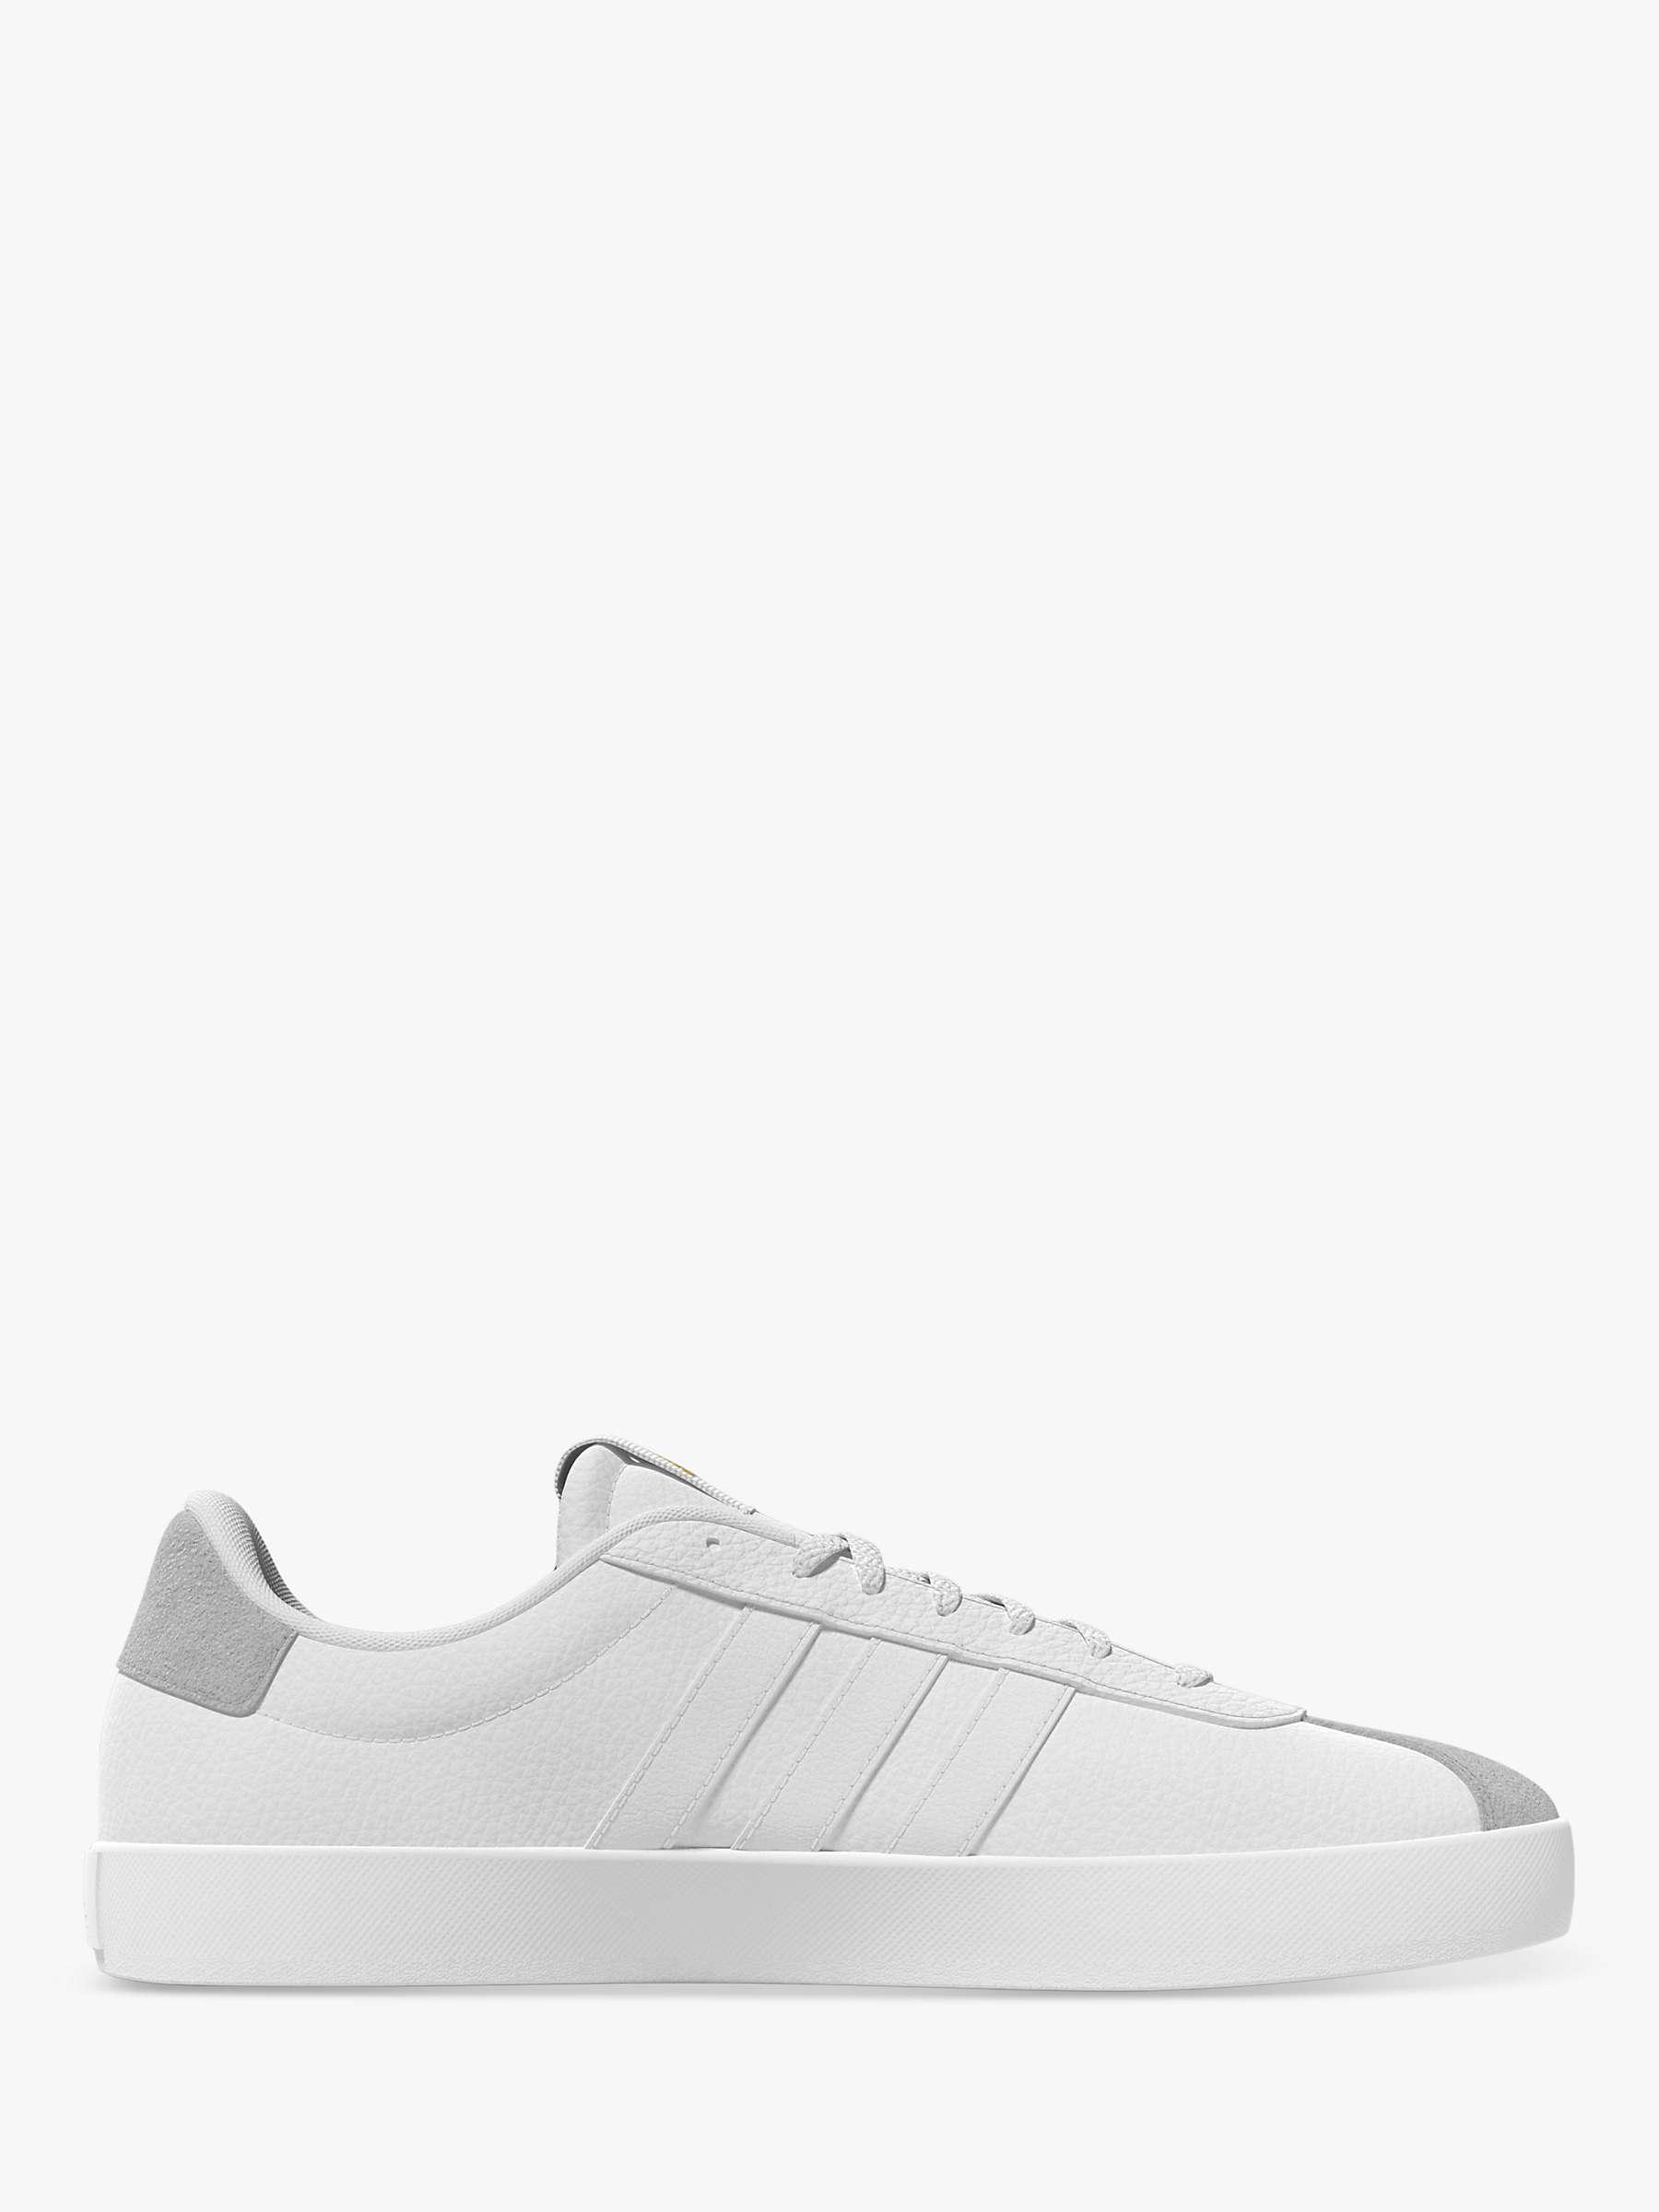 Buy adidas VL Court Trainers Online at johnlewis.com